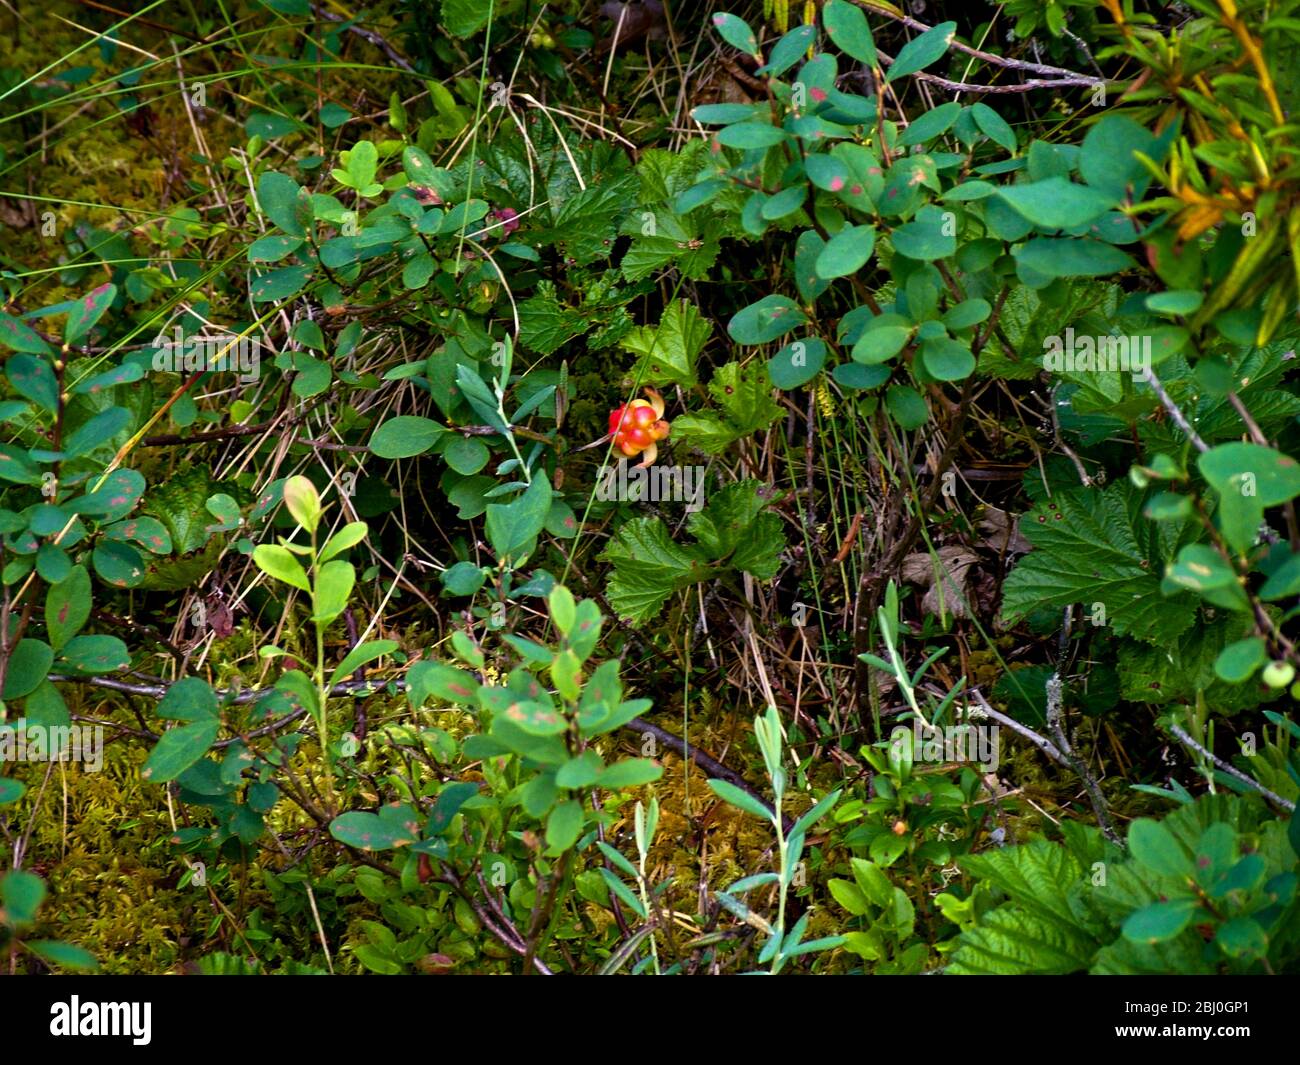 Cloudberry on cloudberry plant among blueberry bushes on Swedish forest floor. - Stock Photo